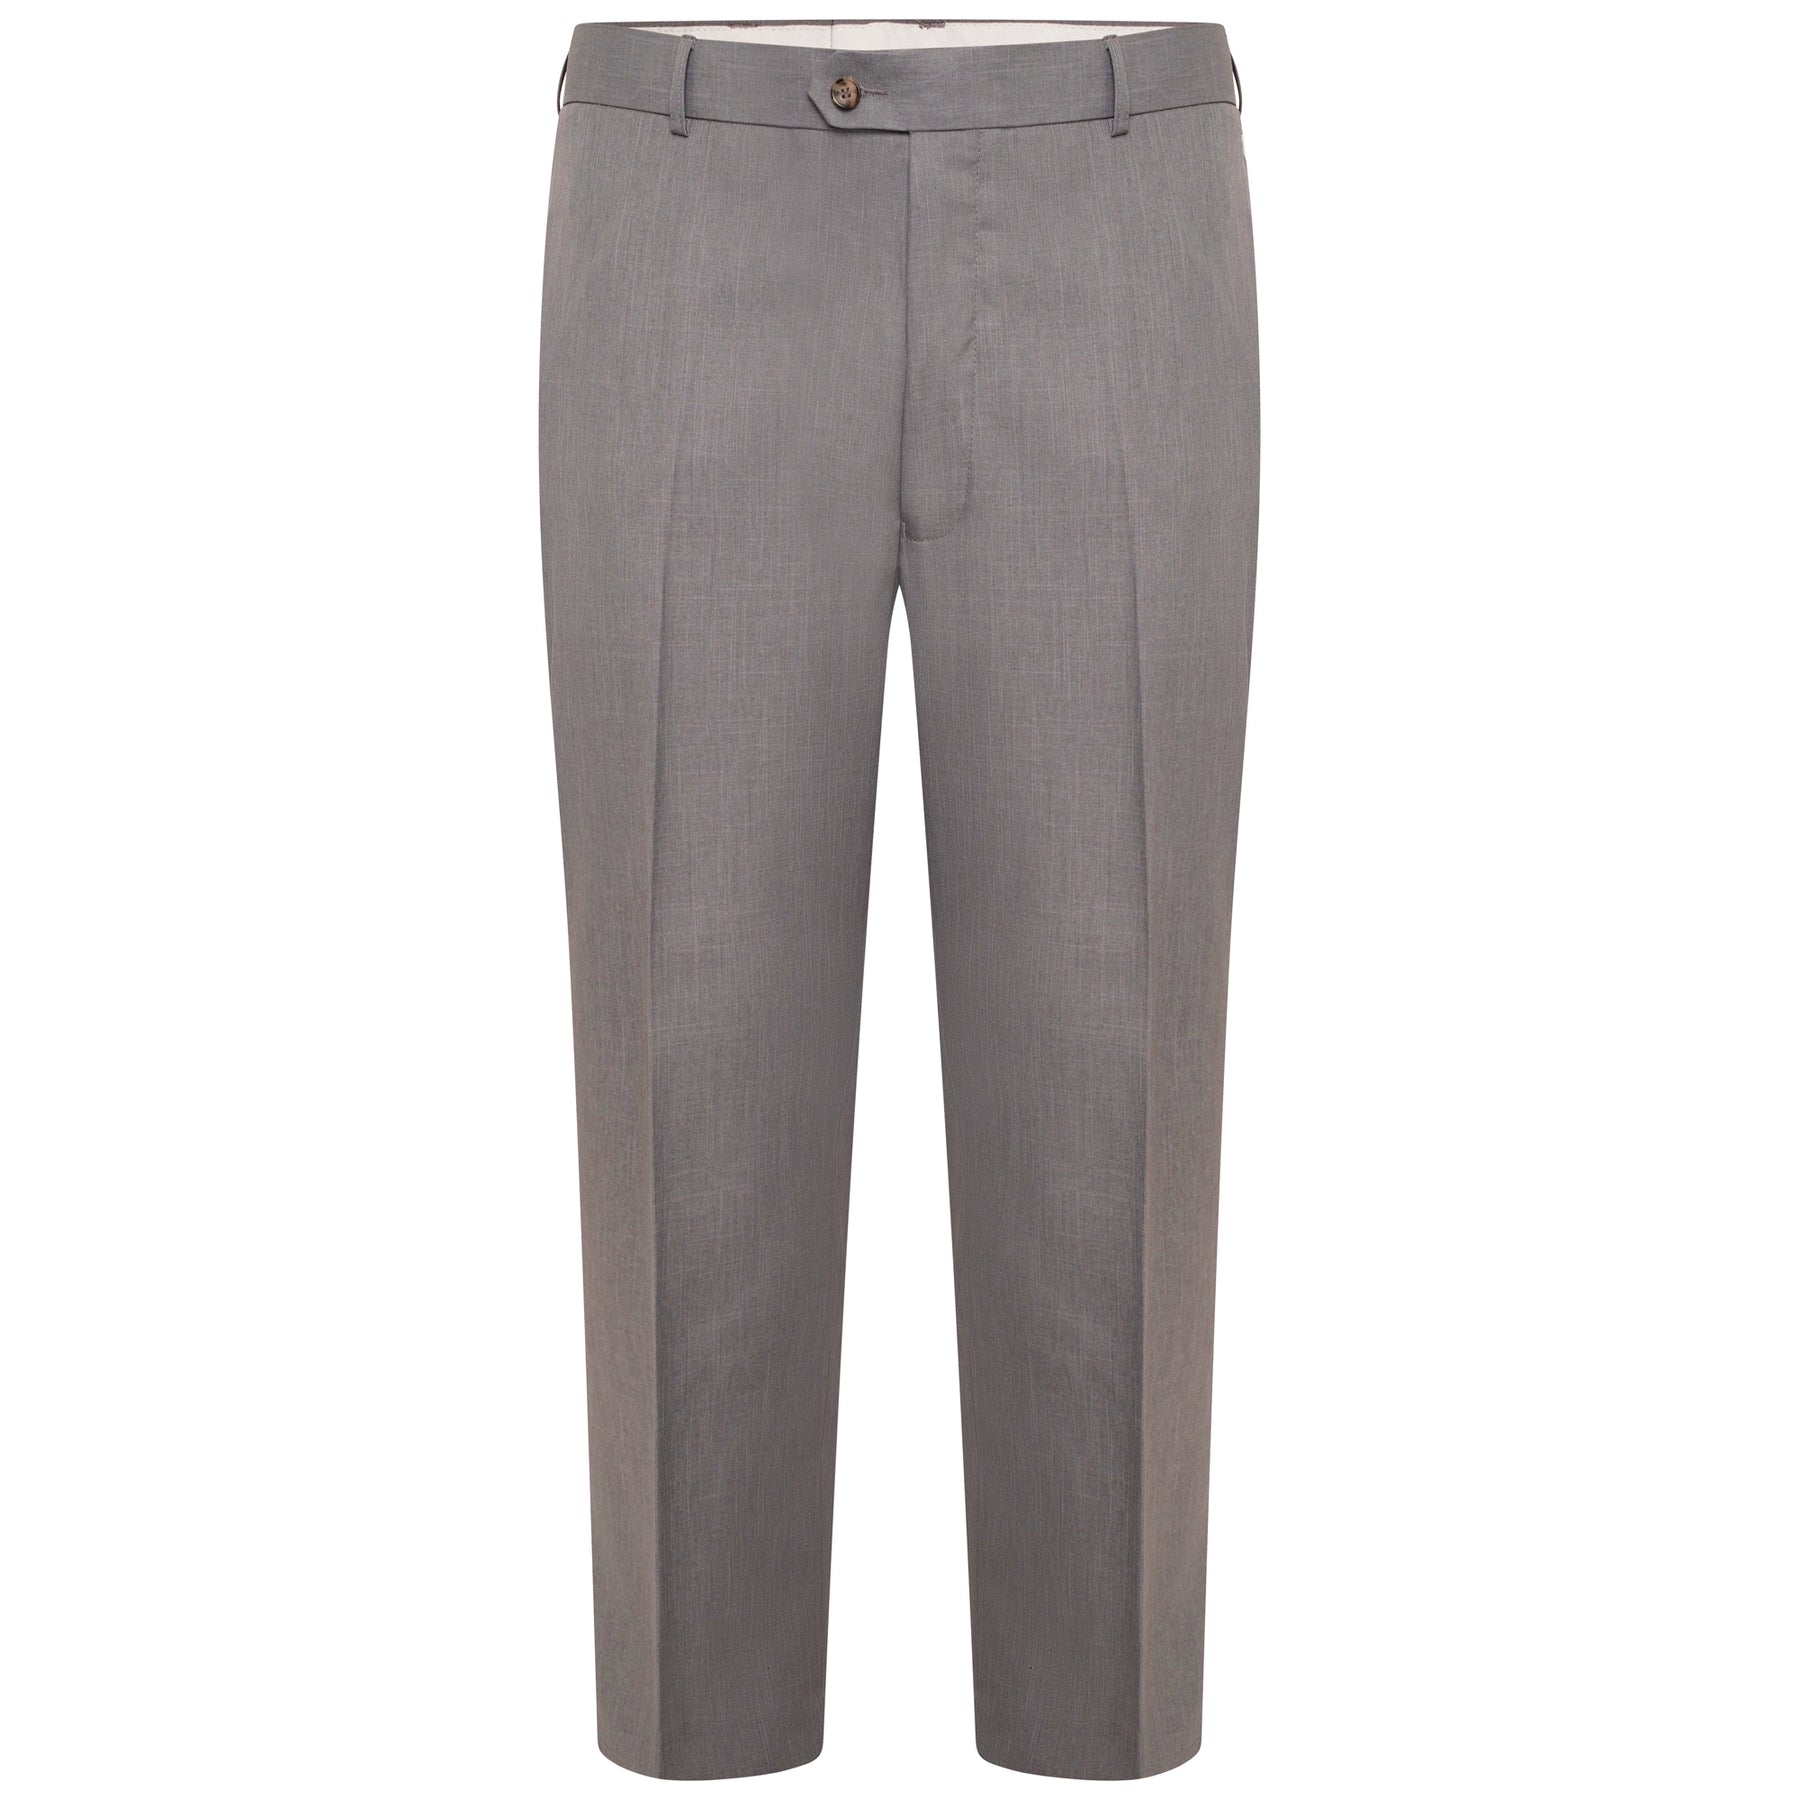 Quality British Made Women's Trousers | Black British Made Women's Trousers